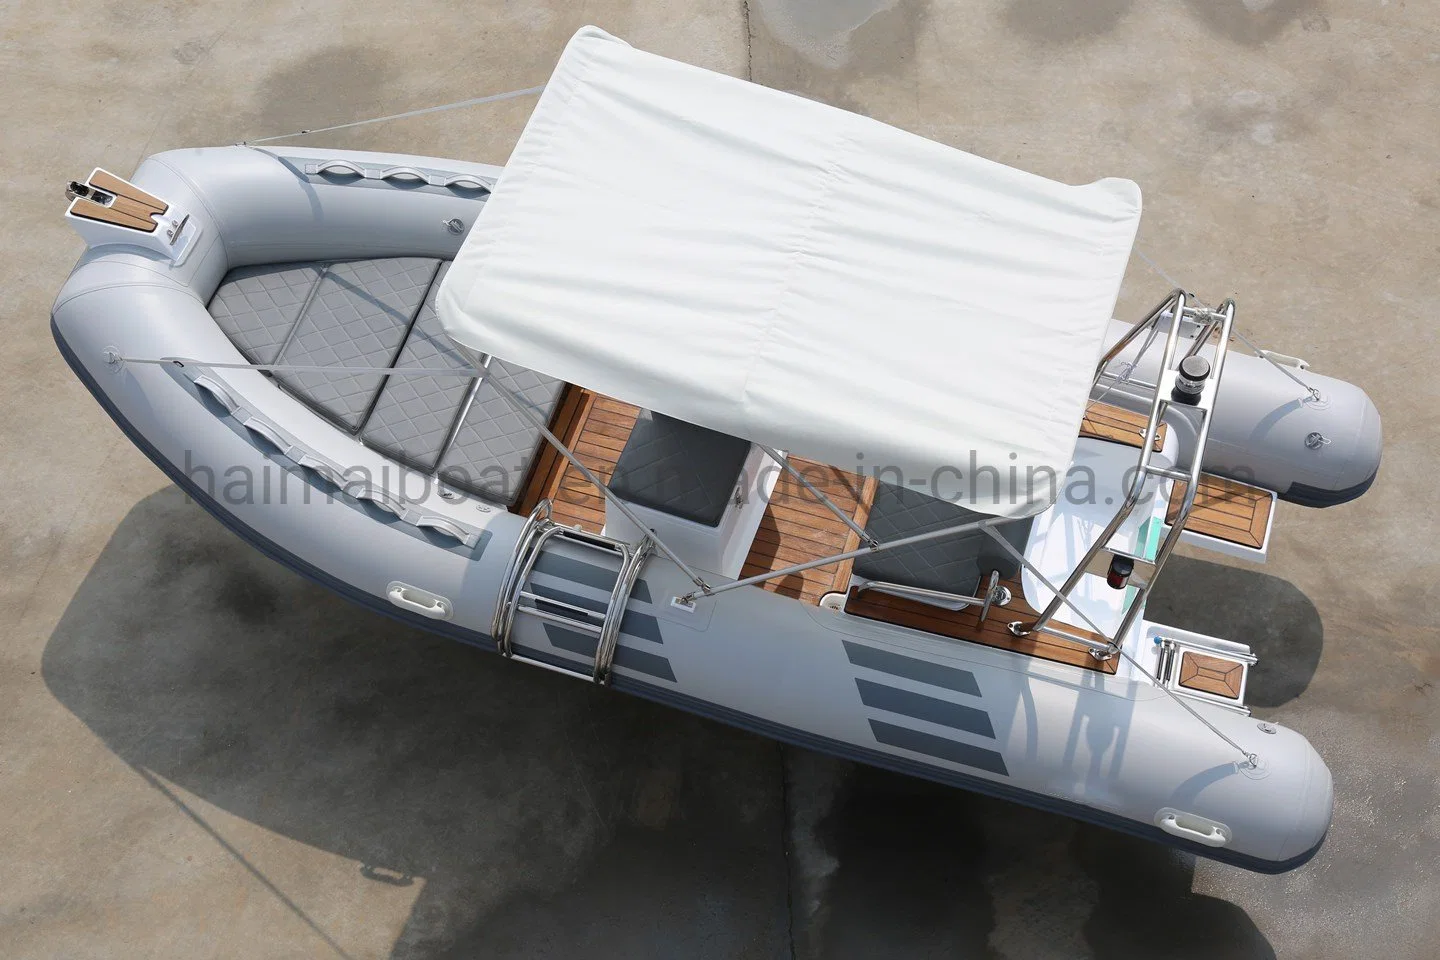 15.7FT 4.8m High Speed Inflatable Sport Boat Fiberglass Rigid Hull Inflatable Fishing Boat Pneumatic Boat Luxury Boat Coastwise Rescue Boat Rib Cruiser Boat